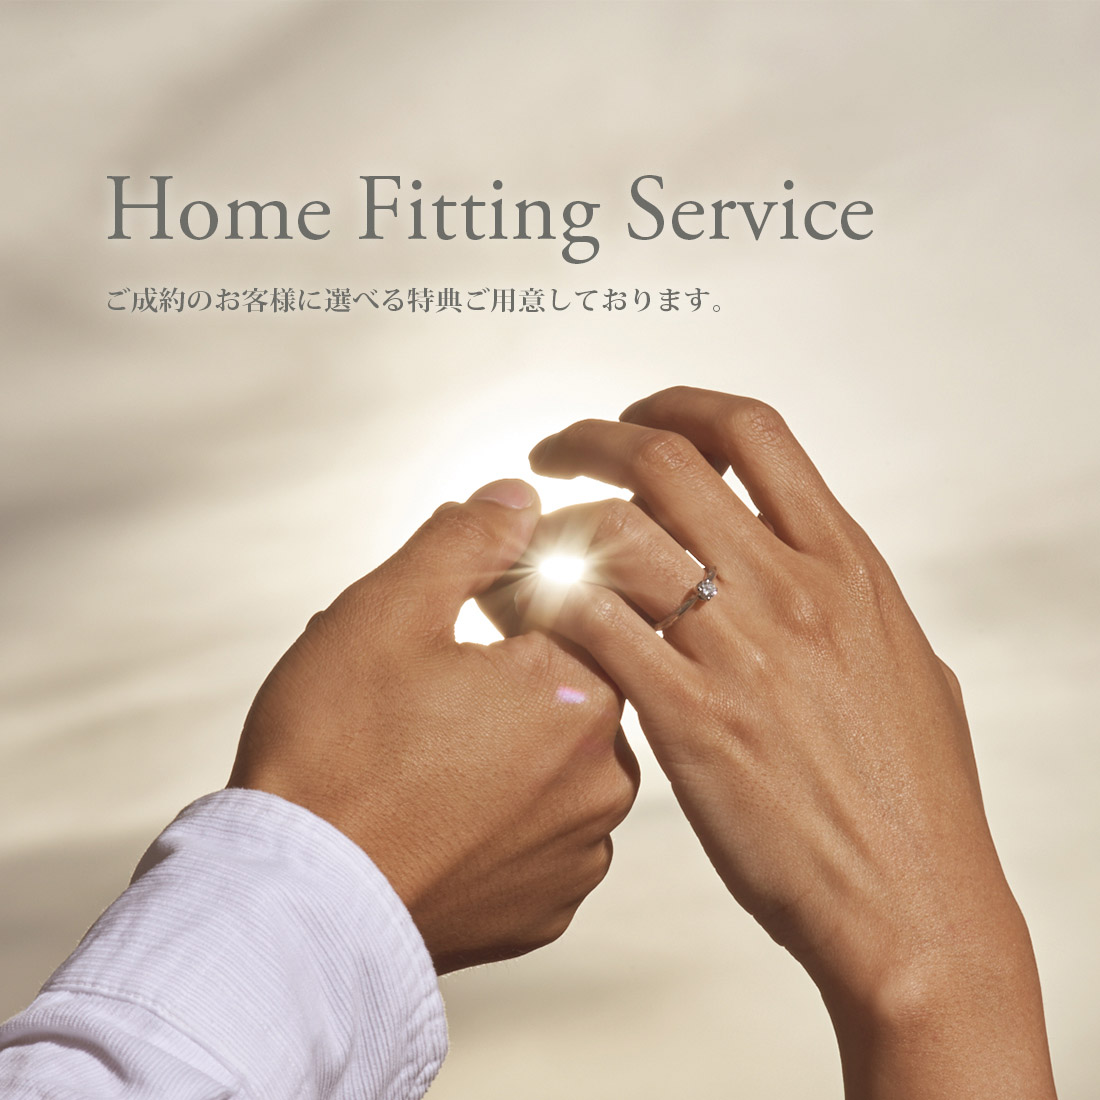 Home Fitting Service